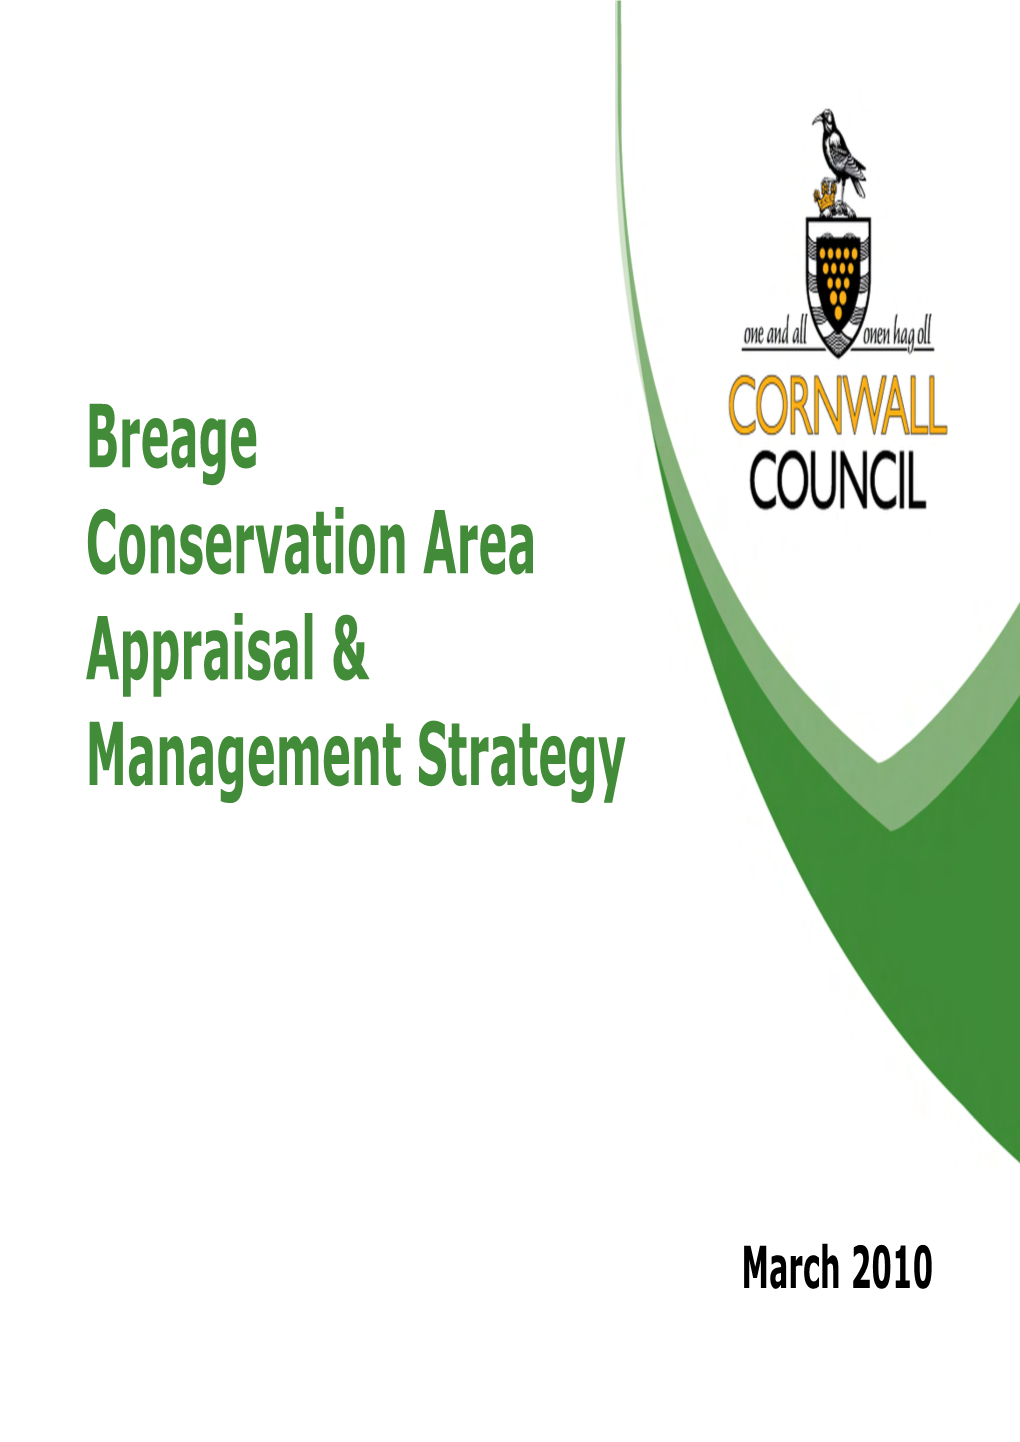 Breage Conservation Area Appraisal & Management Strategy